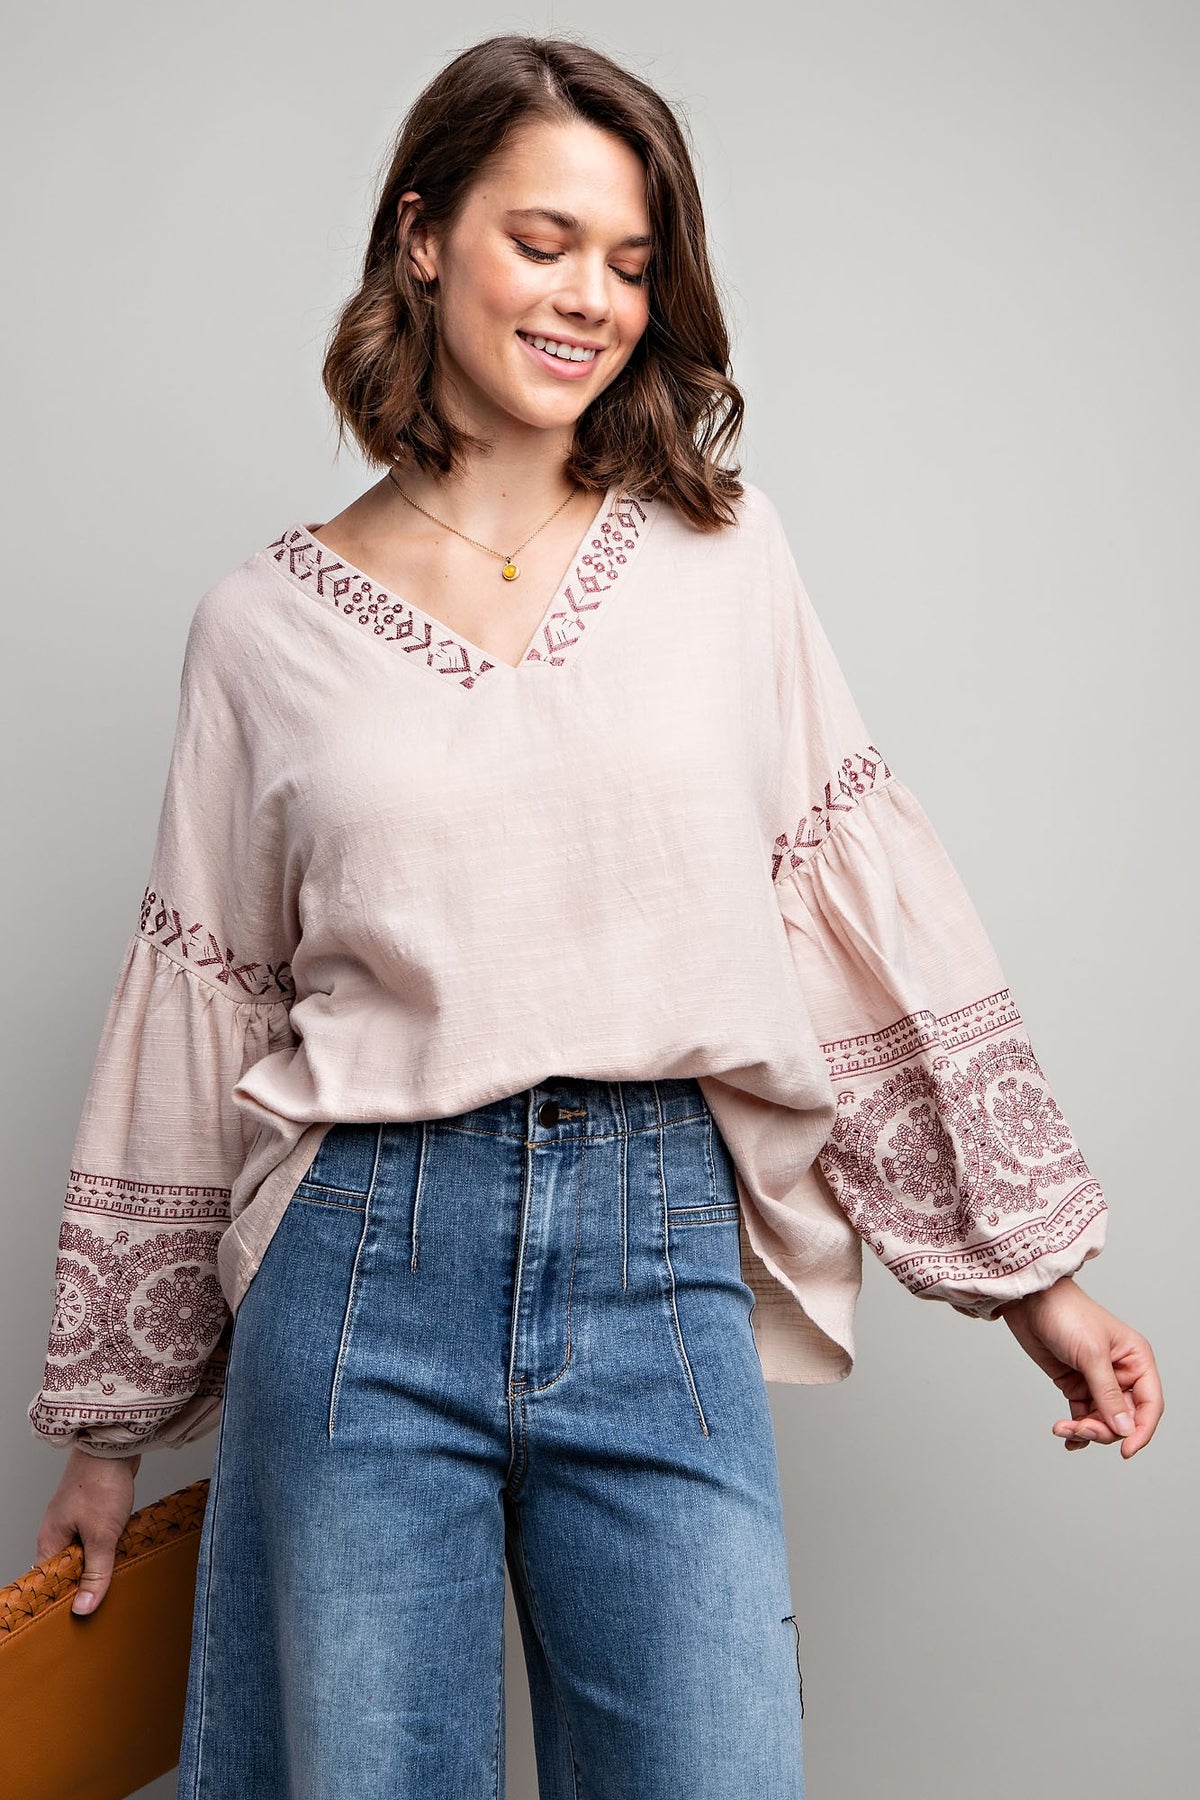 Sun Ray Embroidered blouse * on sale